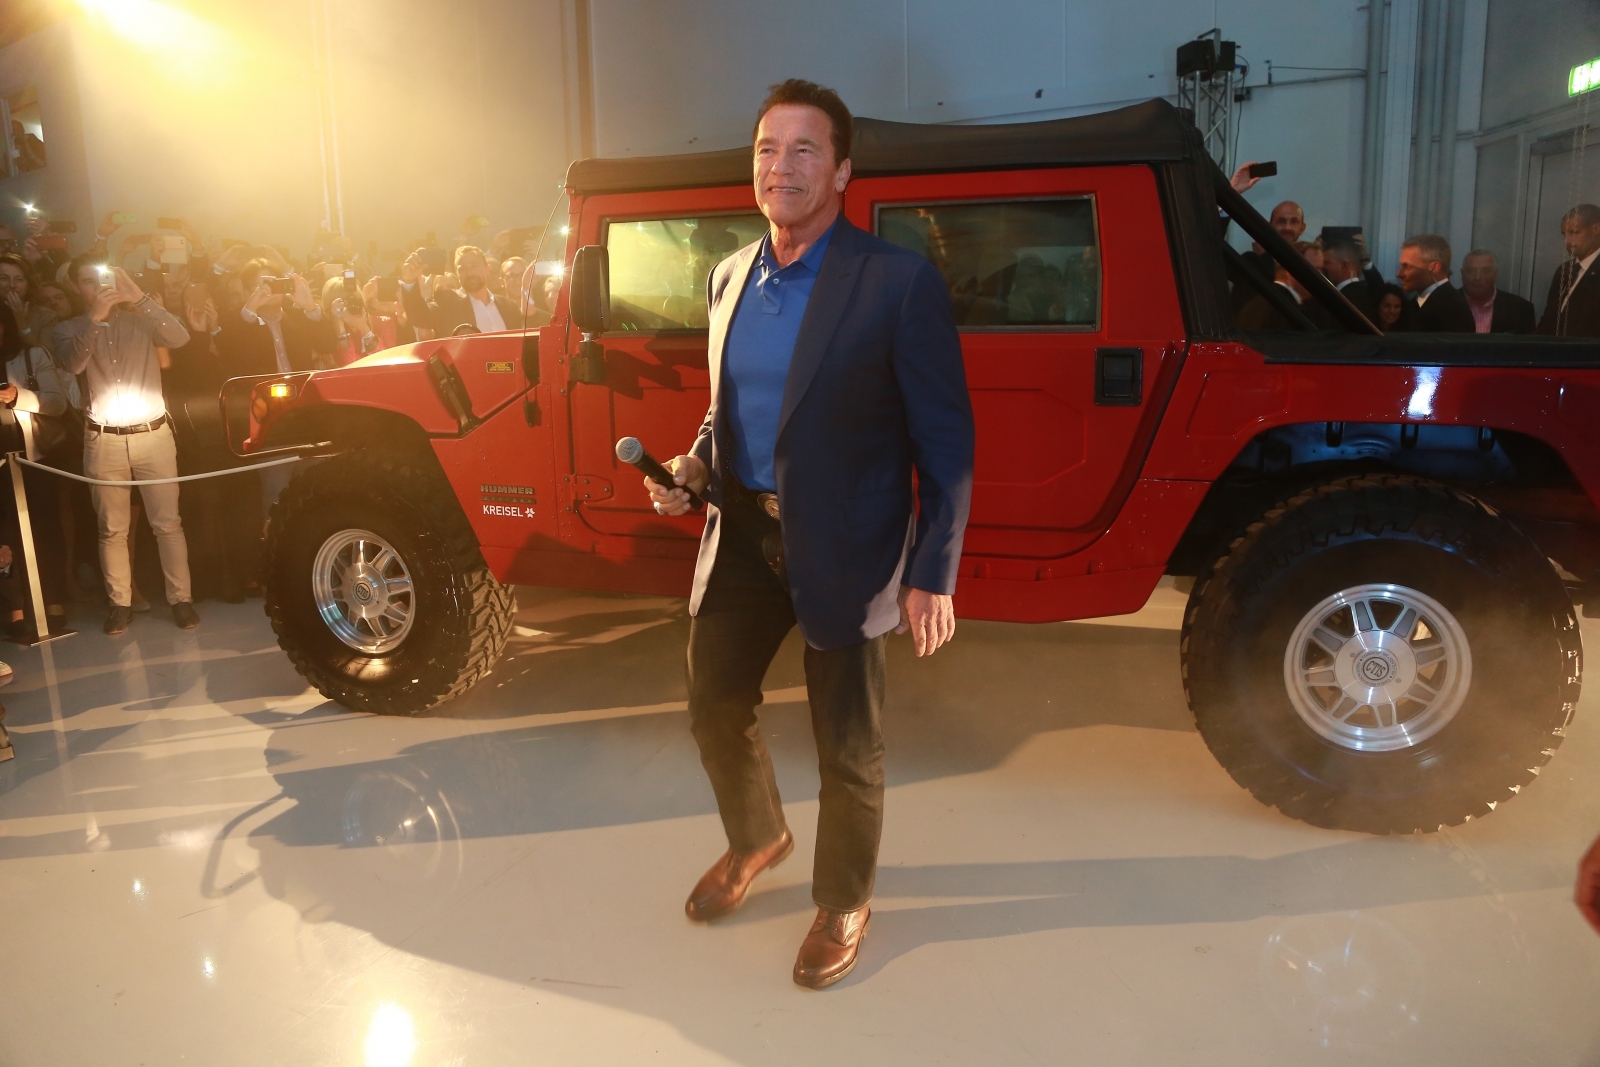 World's first electric Hummer revealed by Arnold Schwarzenegger